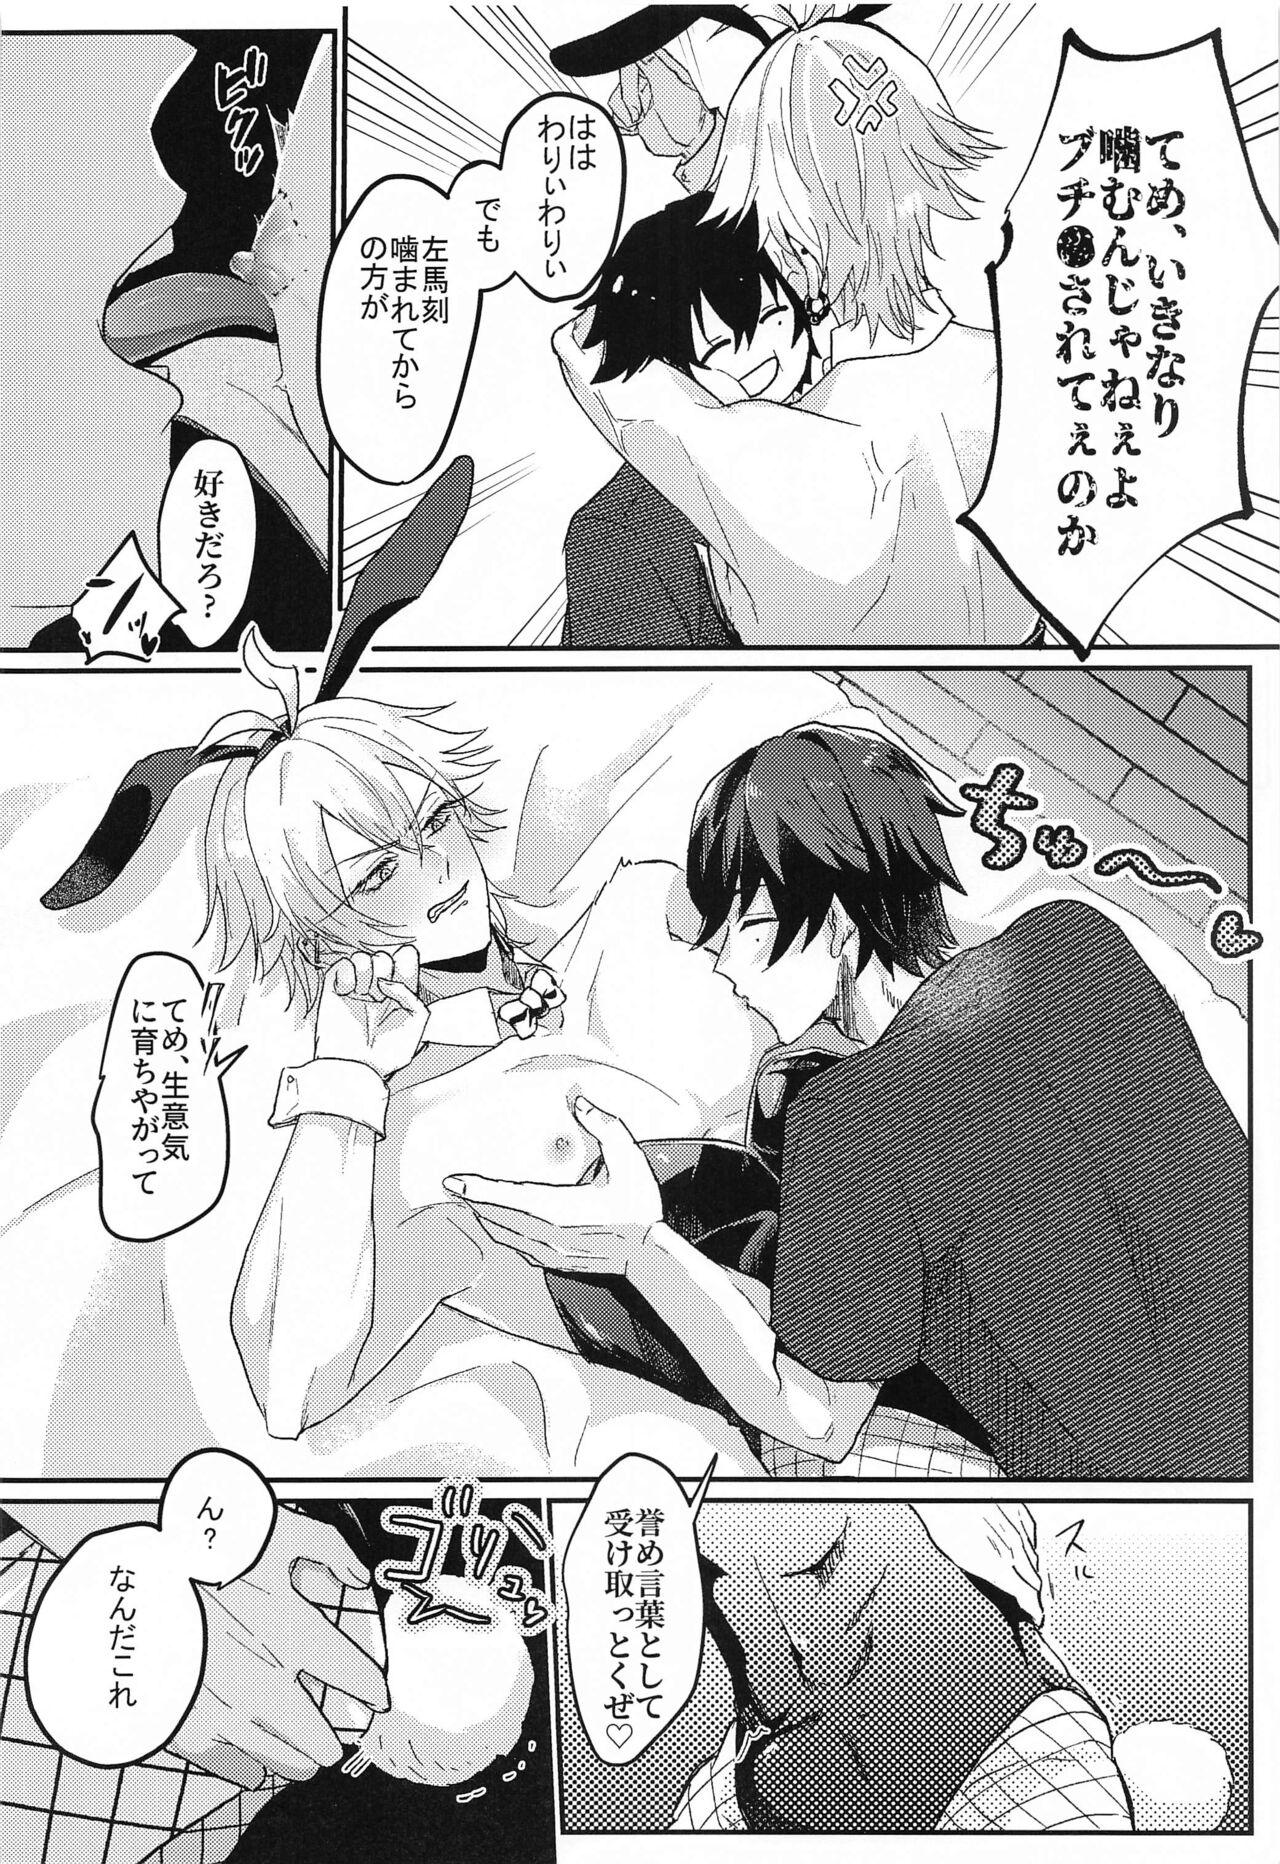 Teensex Bunny - Hypnosis mic Colombia - Page 7